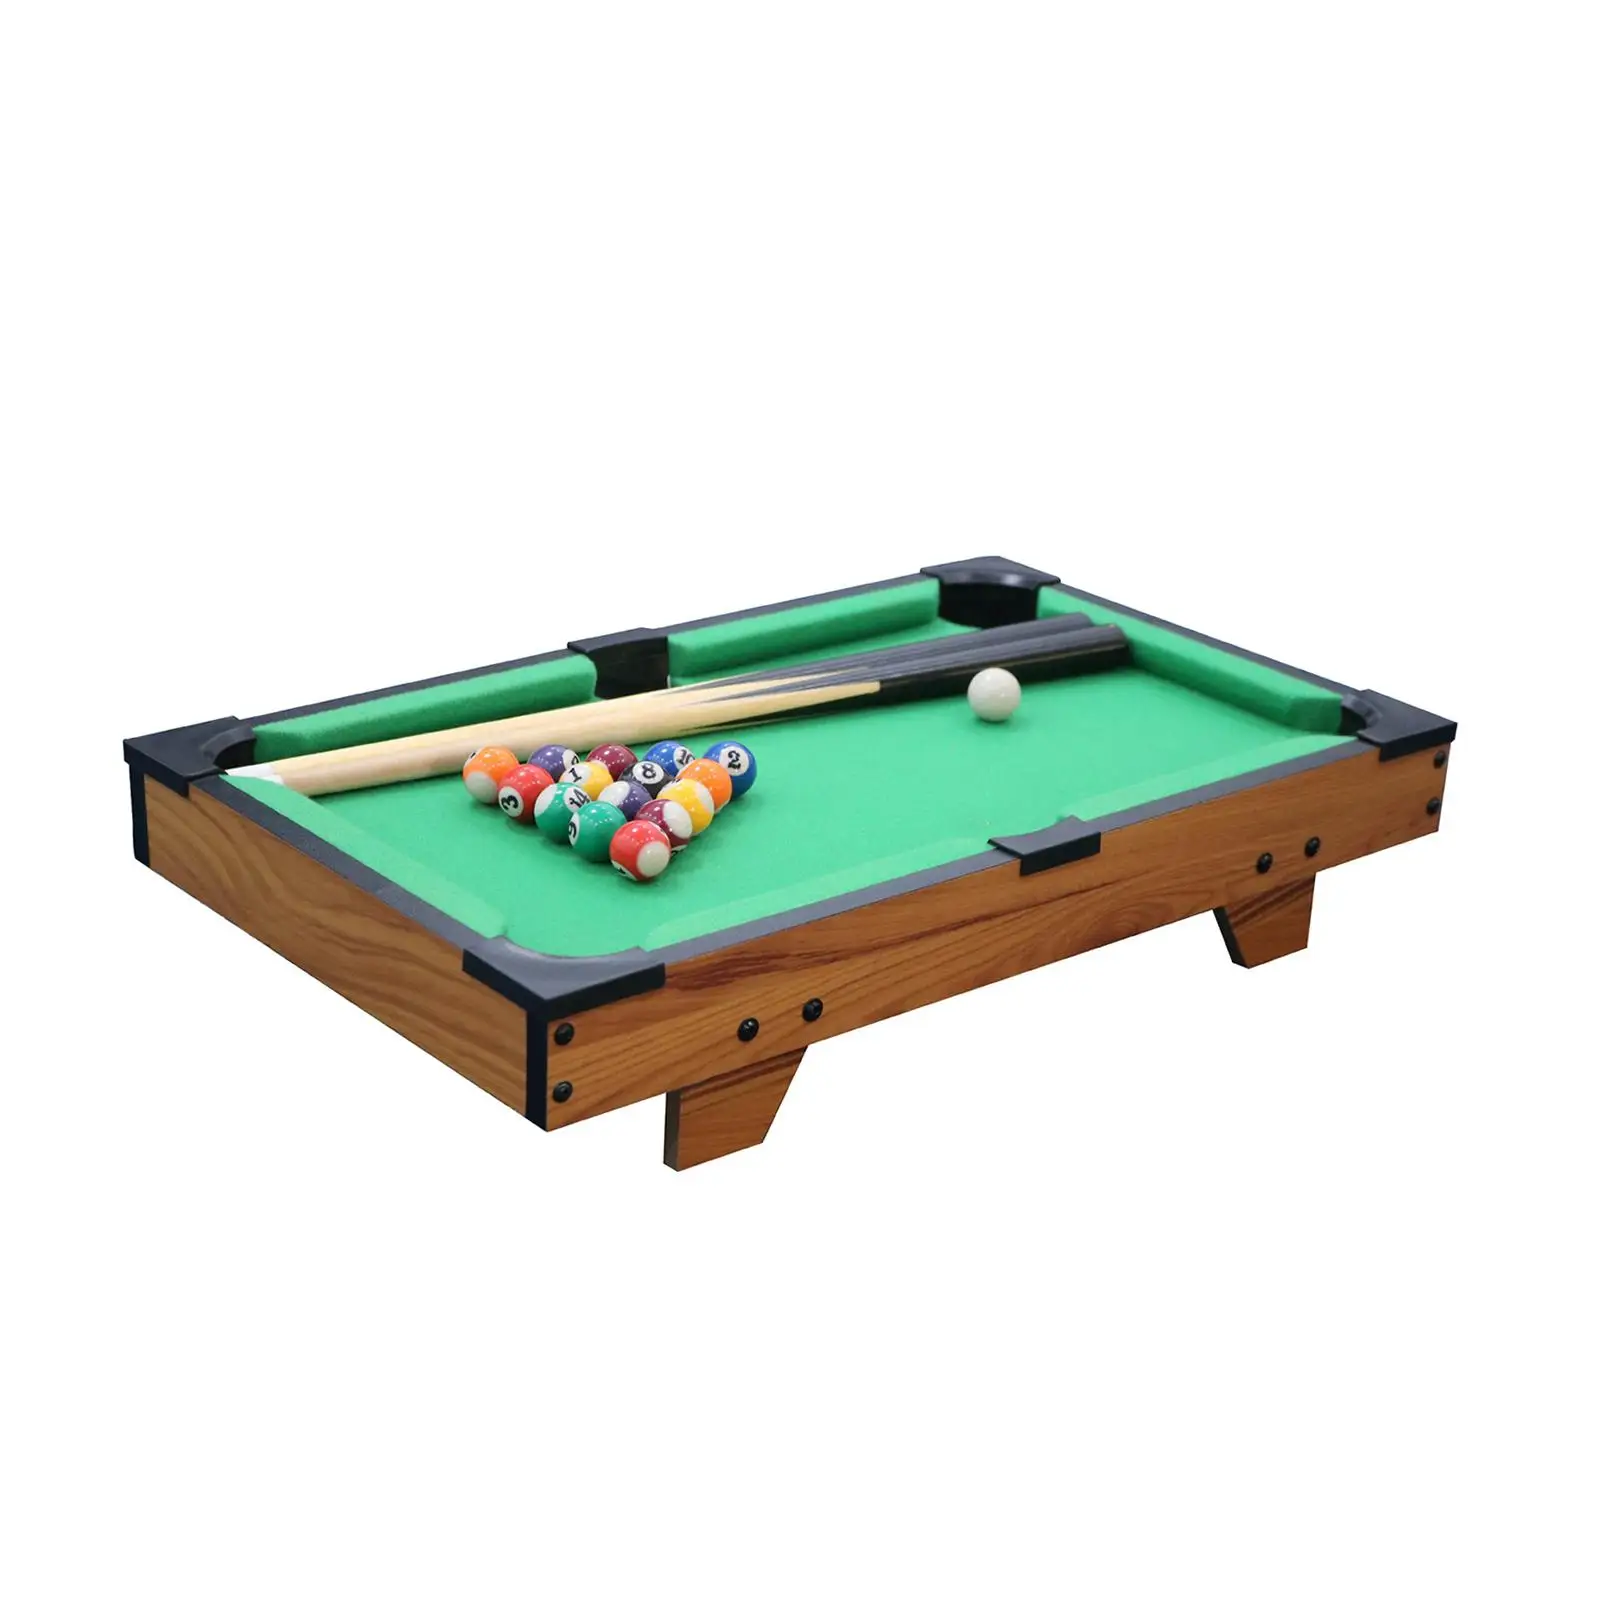 Snooker Play Miniature with Sticks Mini Table pool for Desktop Home Family Sports Kids